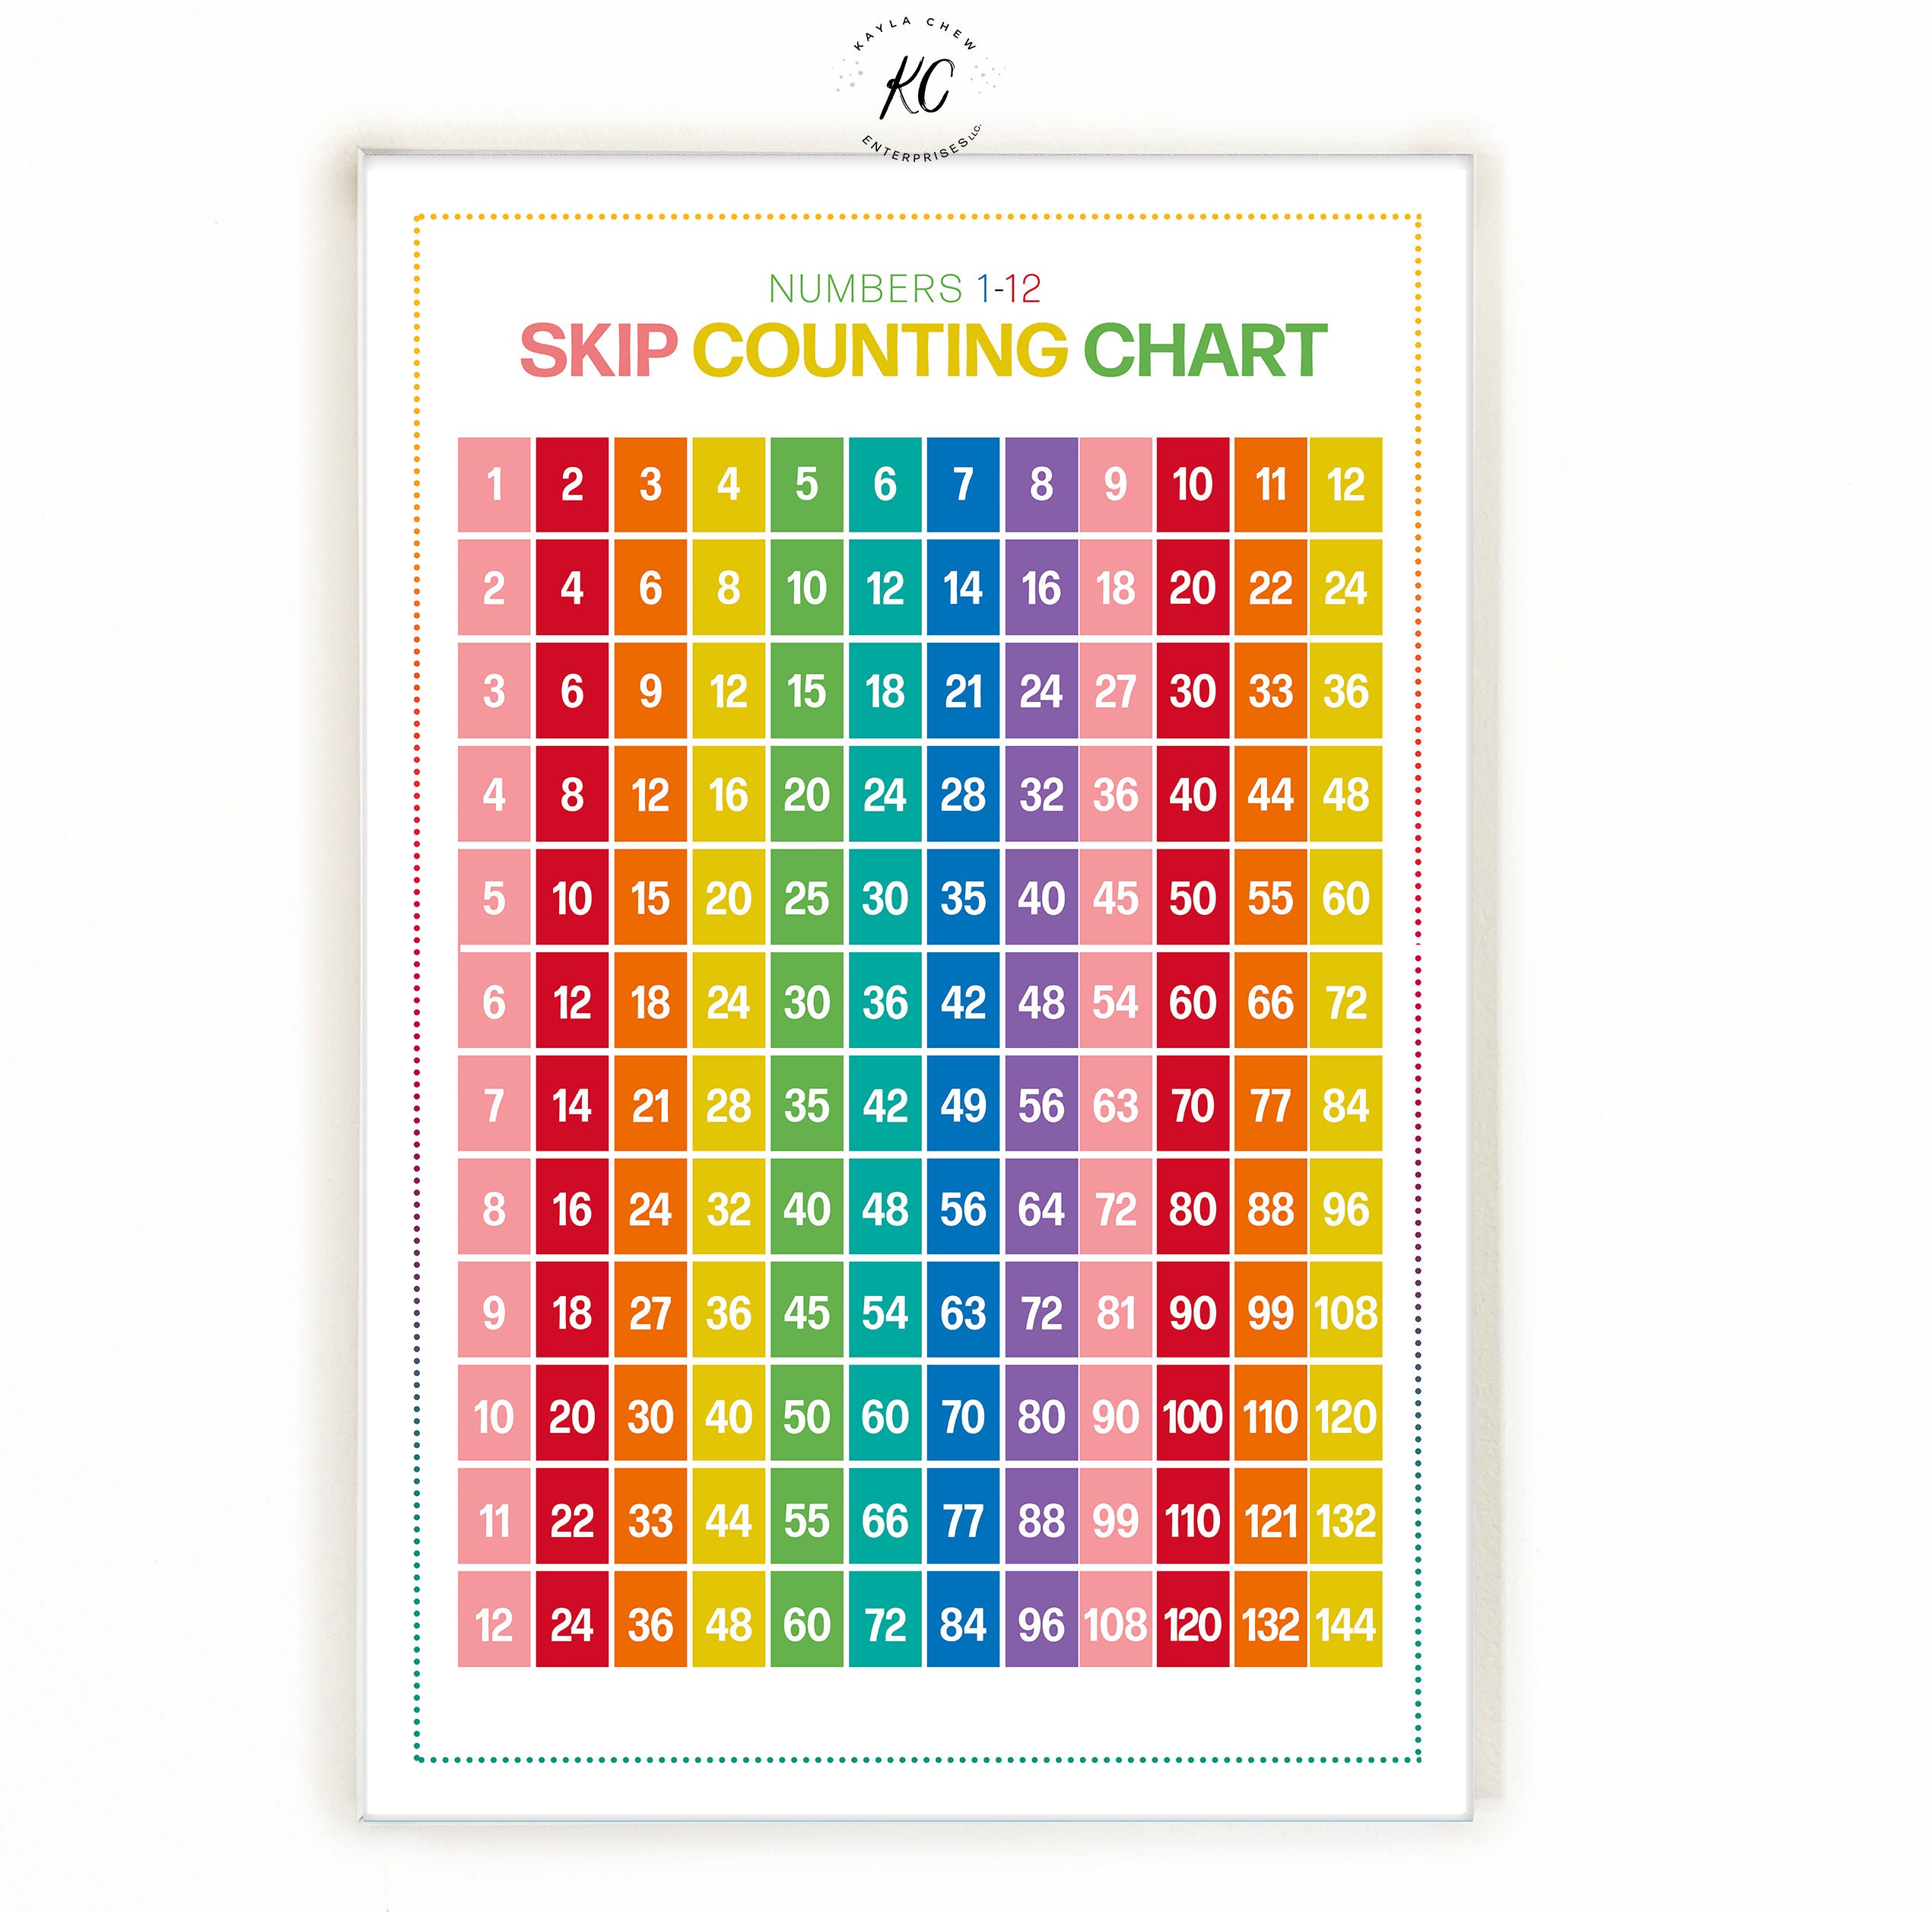 skip-counting-chart-12-skip-counting-chart-for-home-school-or-classroom